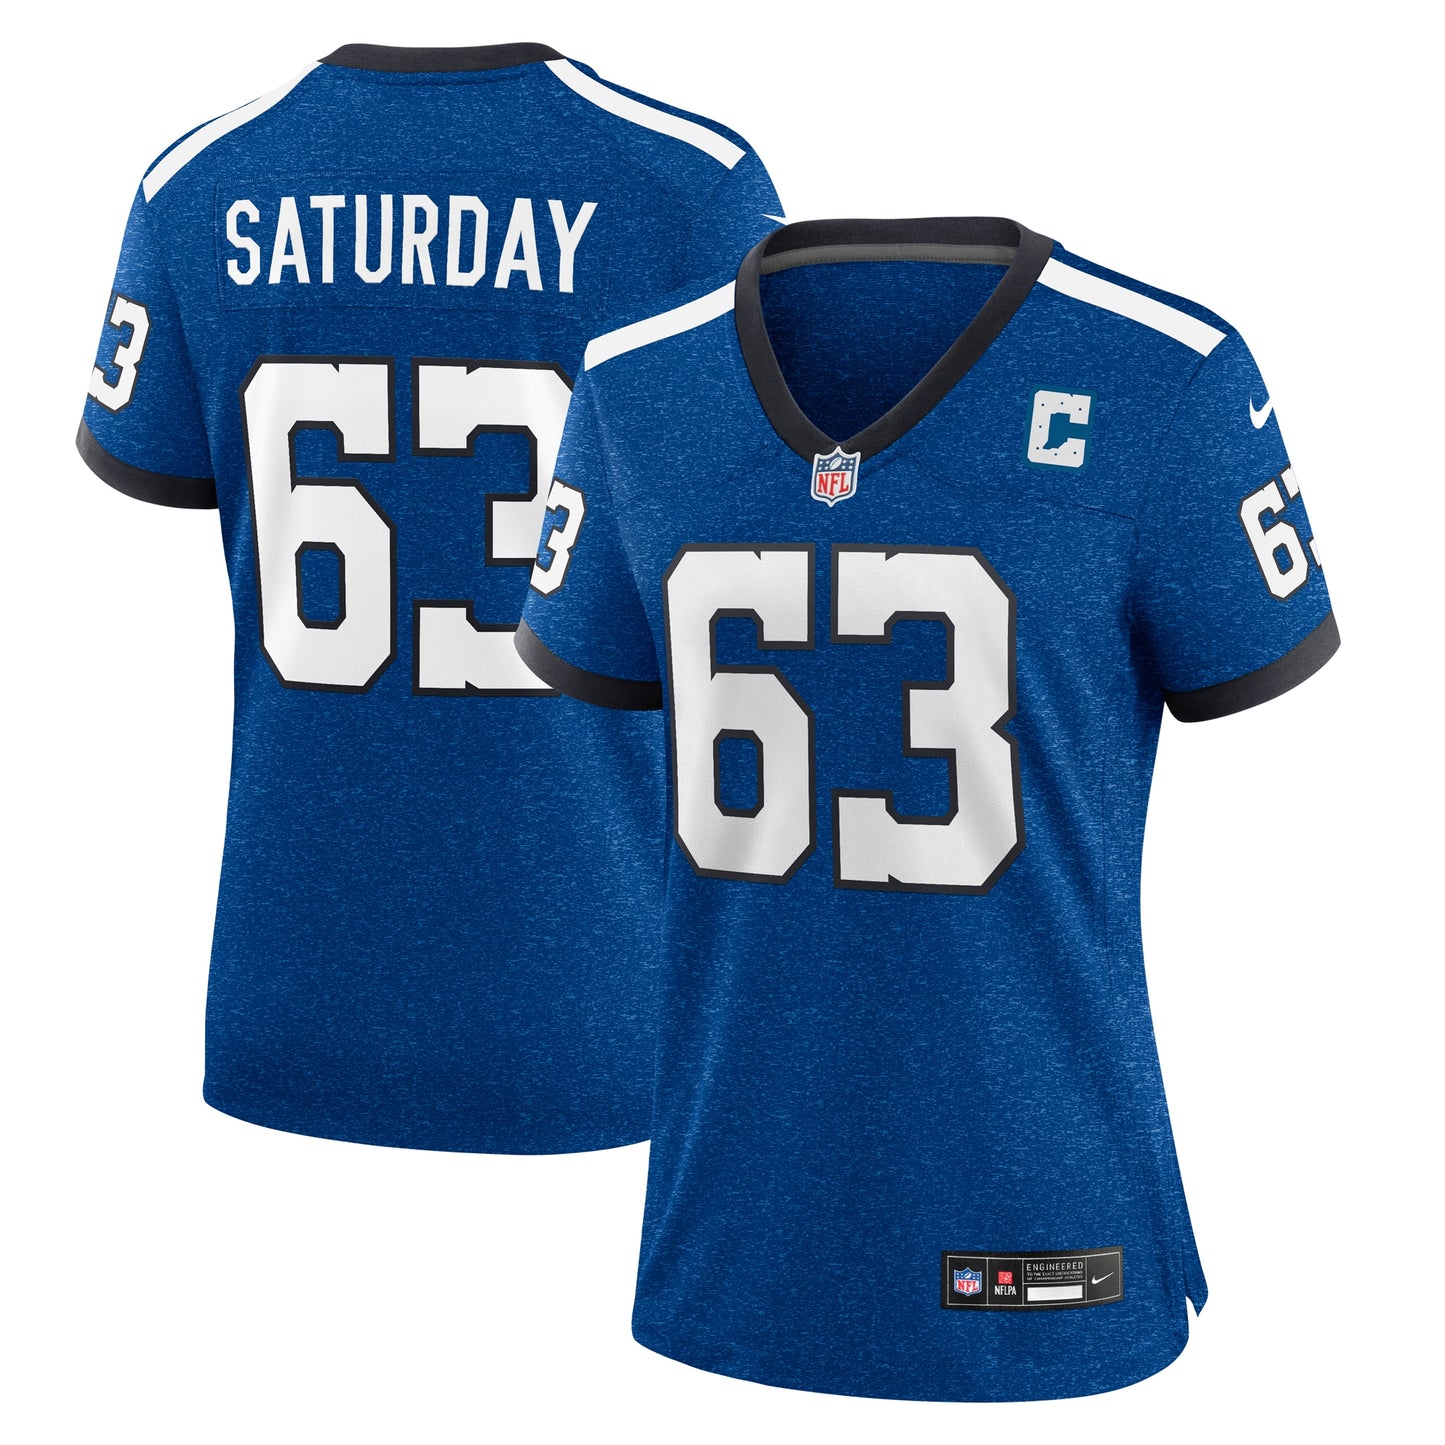 Jeff Saturday Indianapolis Colts Nike Women's Indiana Nights Alternate Game Jersey - Royal